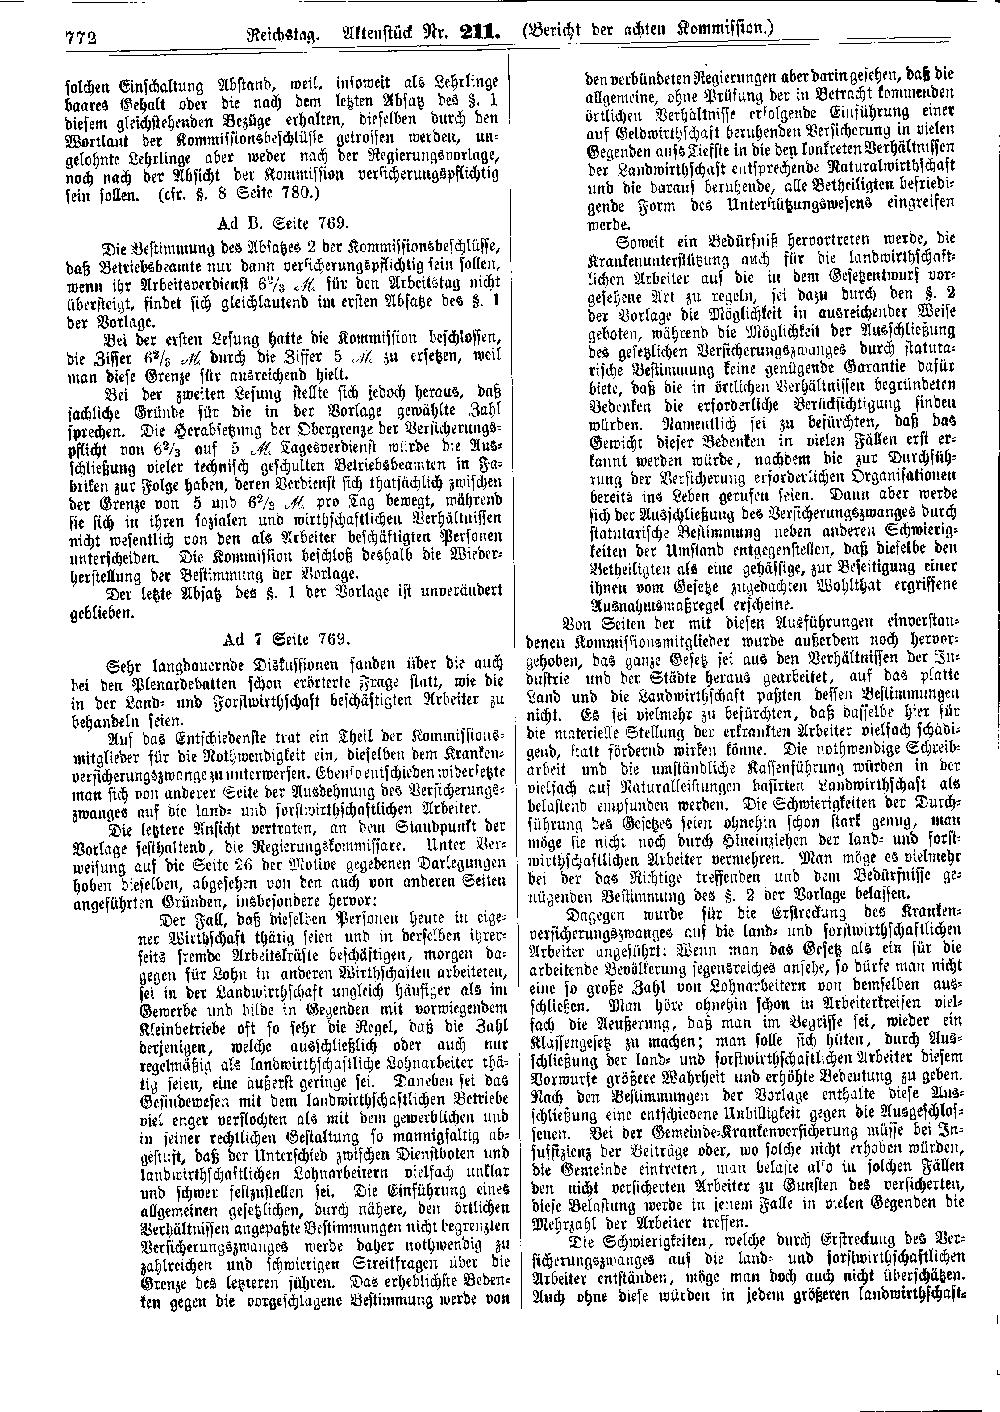 Scan of page 772